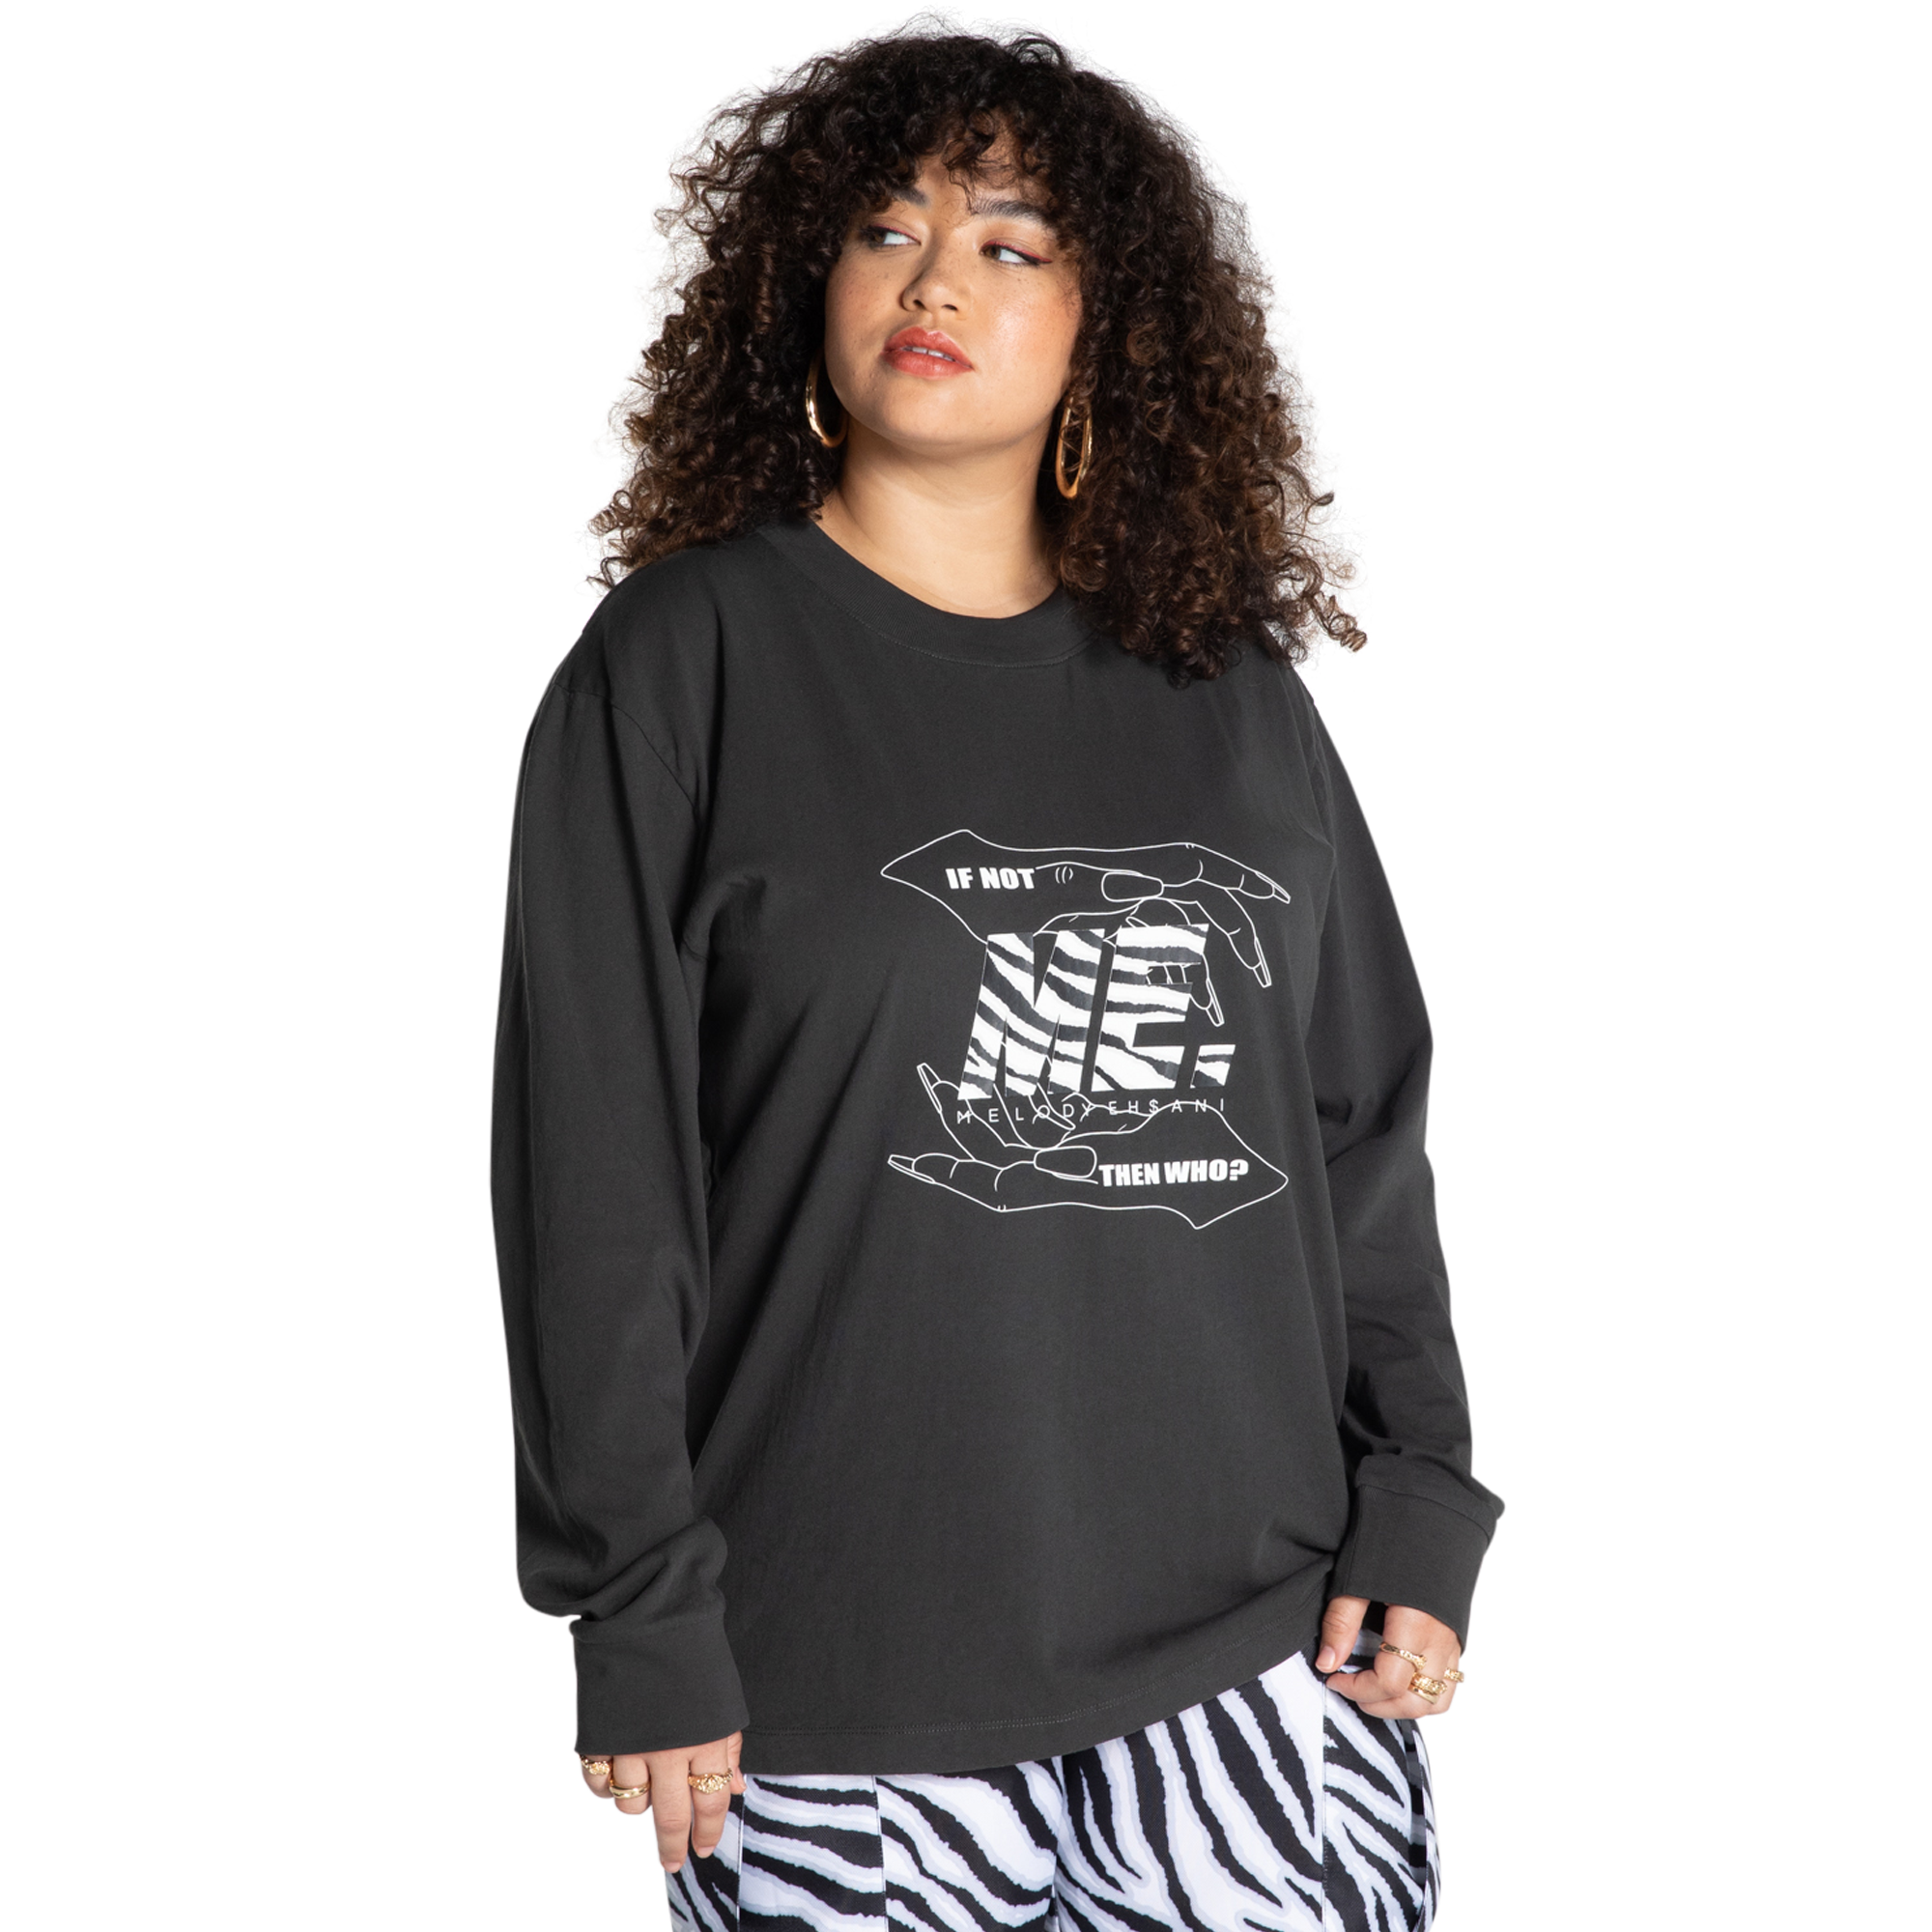 Melody Ehsani If Not Who Long Sleeve